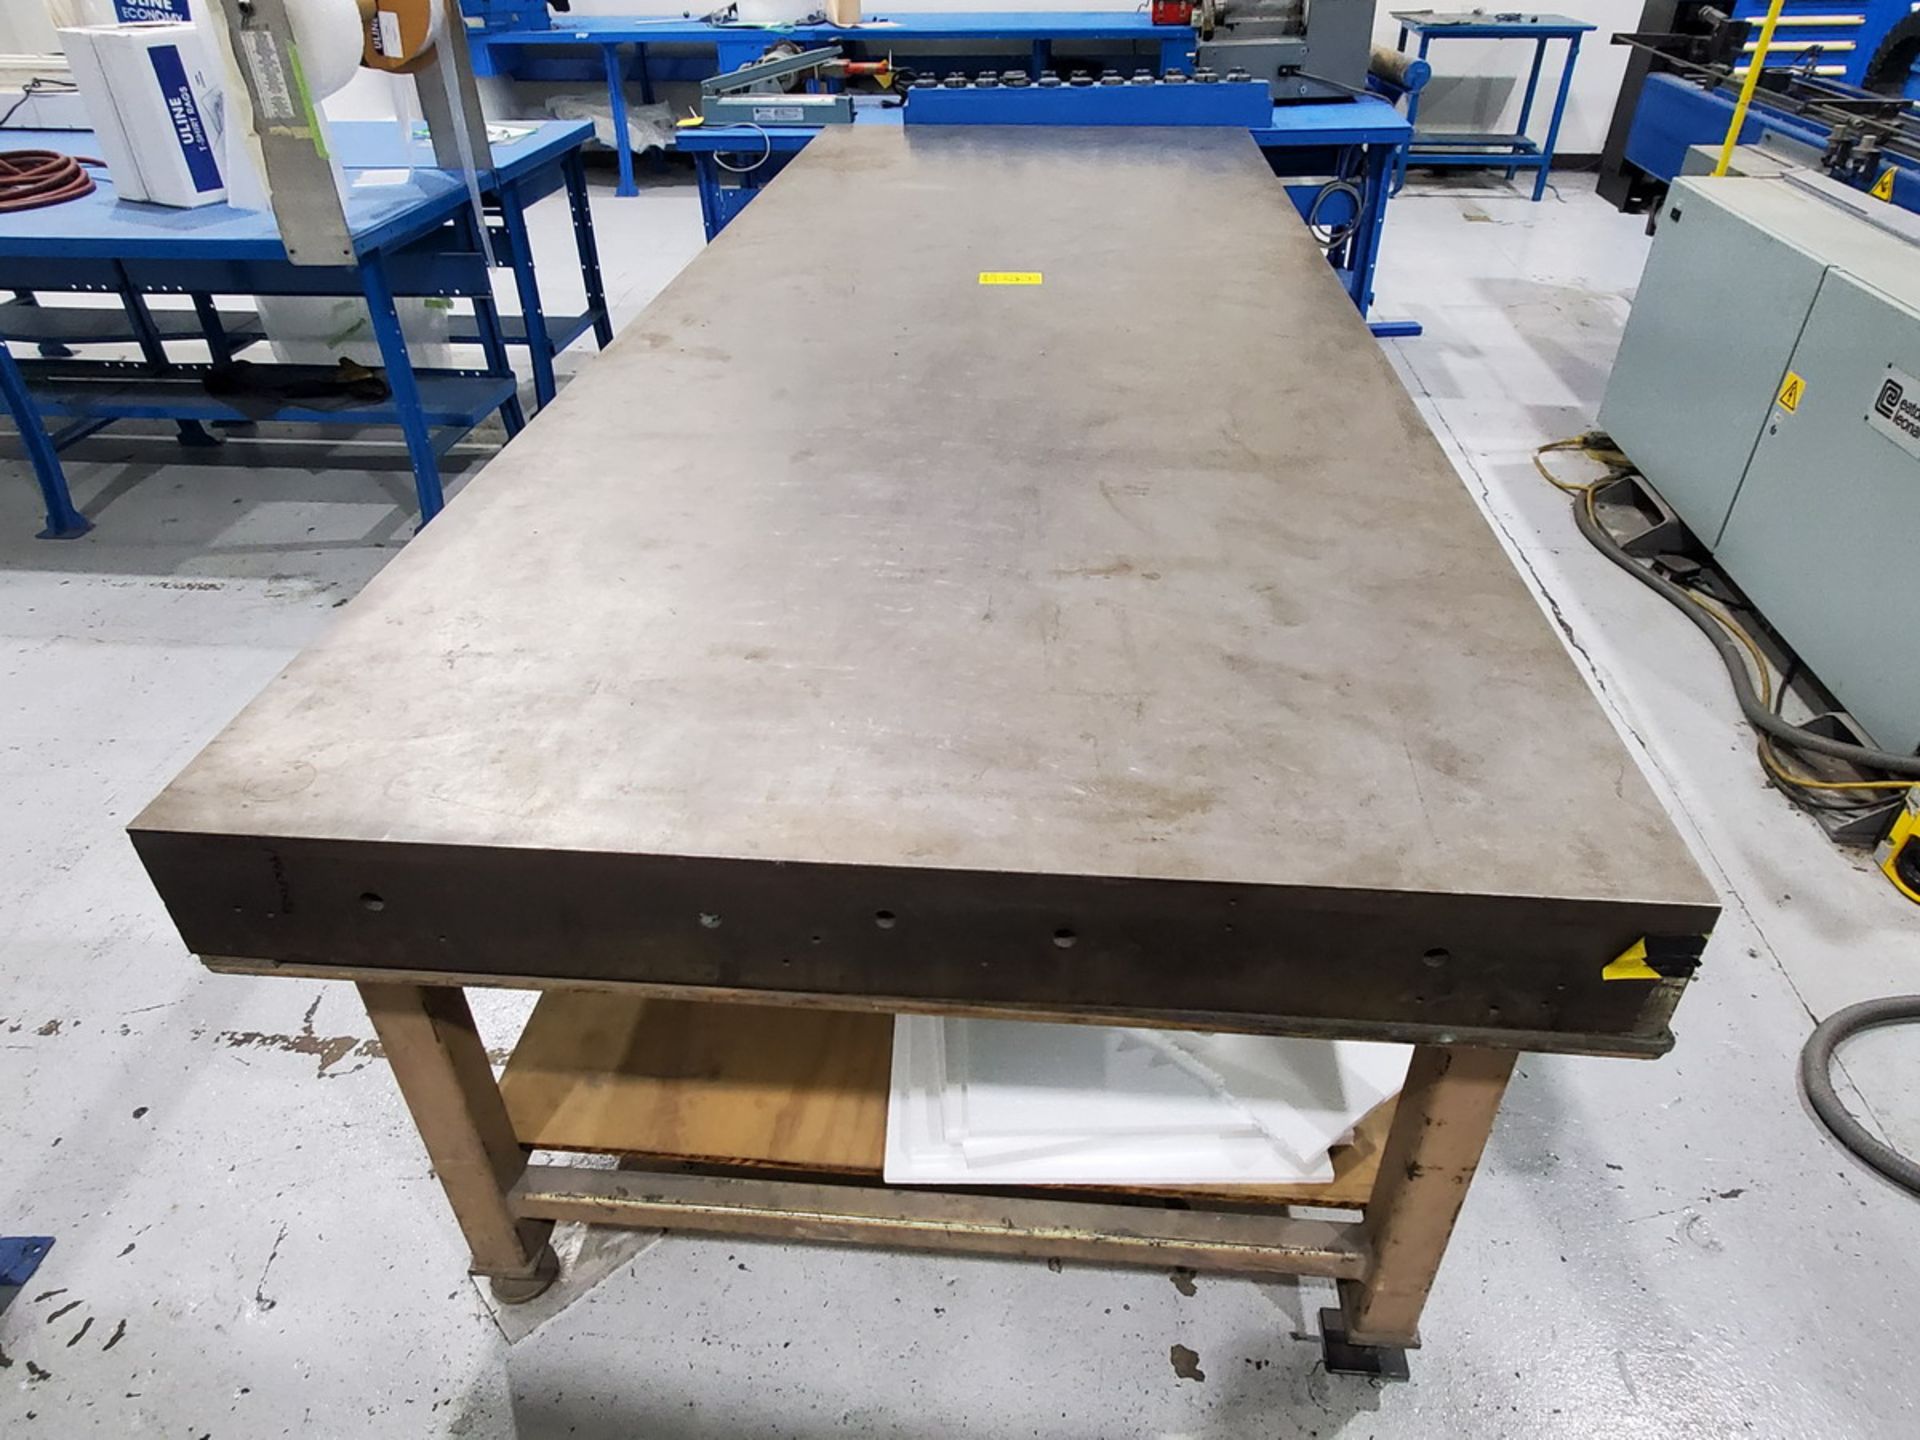 Stl Work Table 144" x 54" x 36"H - Image 2 of 4